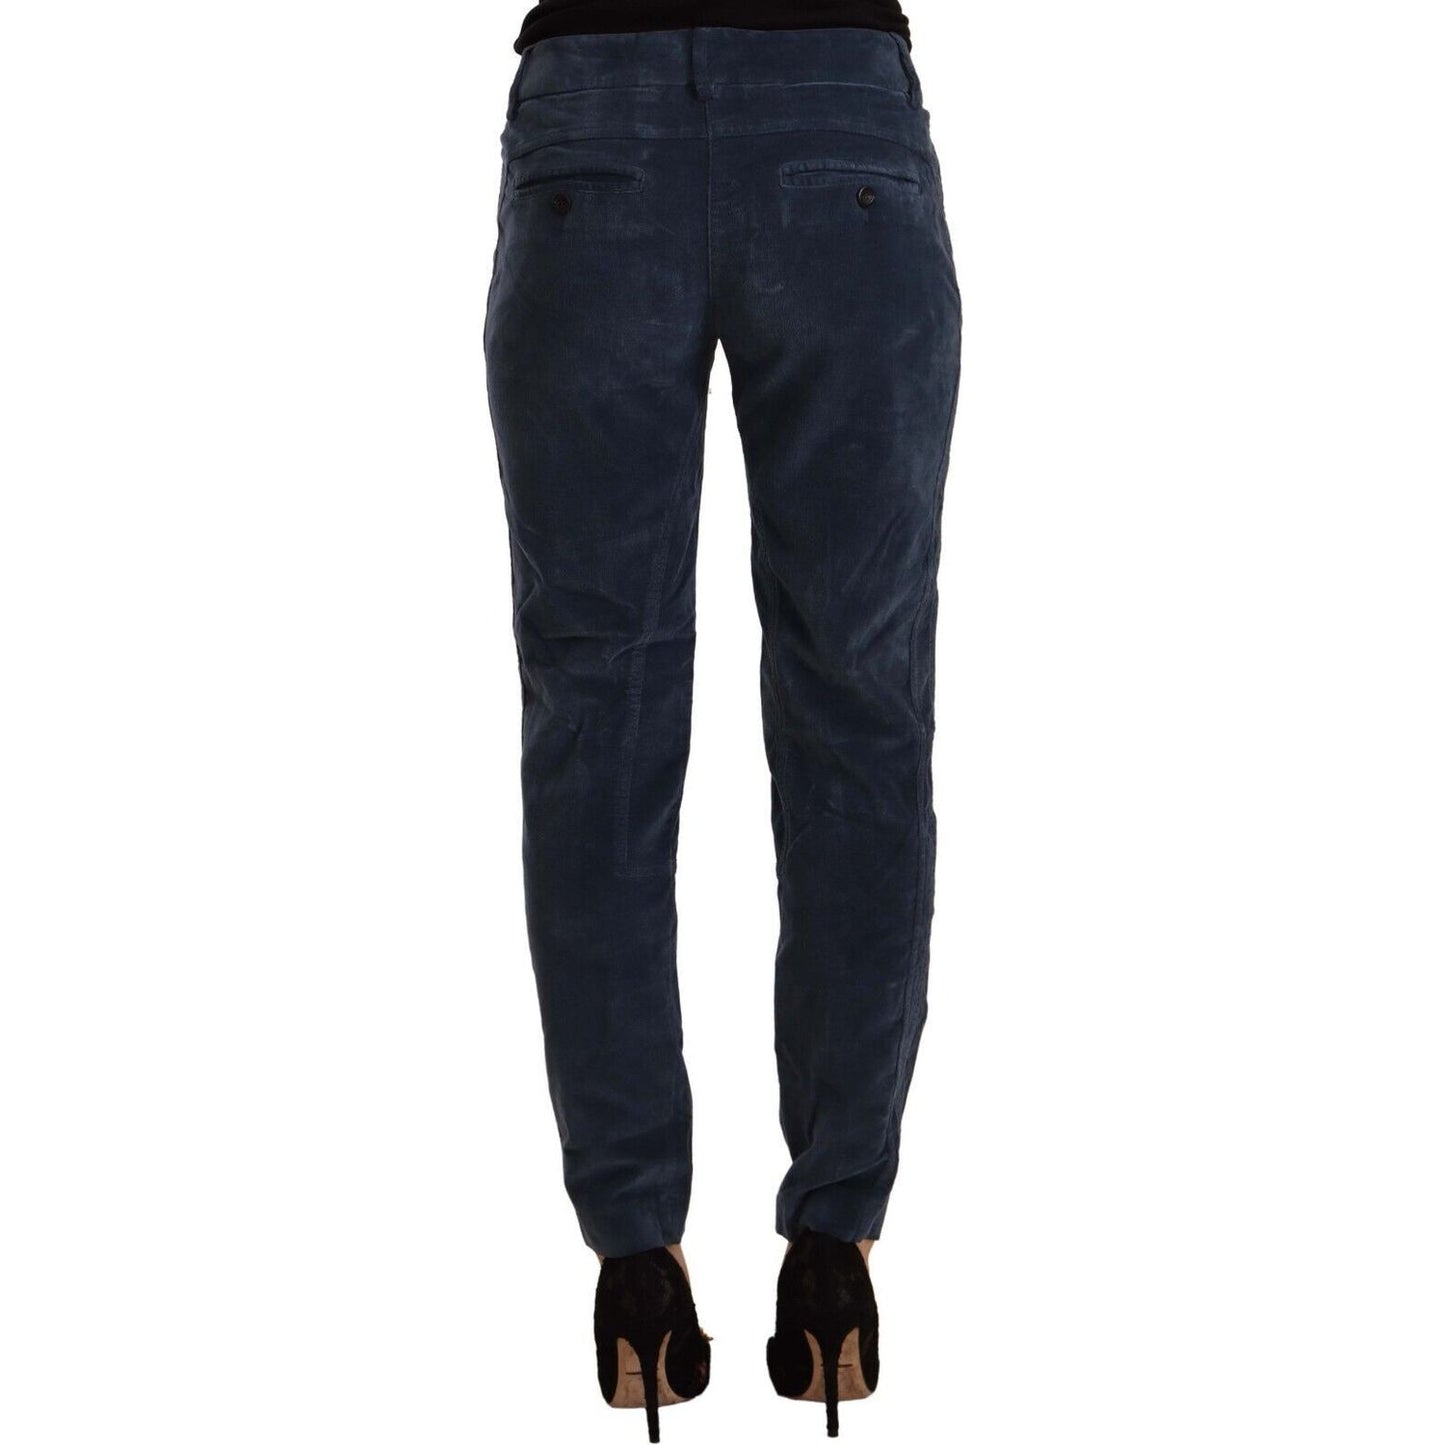 Peserico Elegant Tapered Cotton Blend Pants blue-mid-waist-cotton-stretch-tapered-pants s-l1600-17-1-06aaa994-8d0.jpg